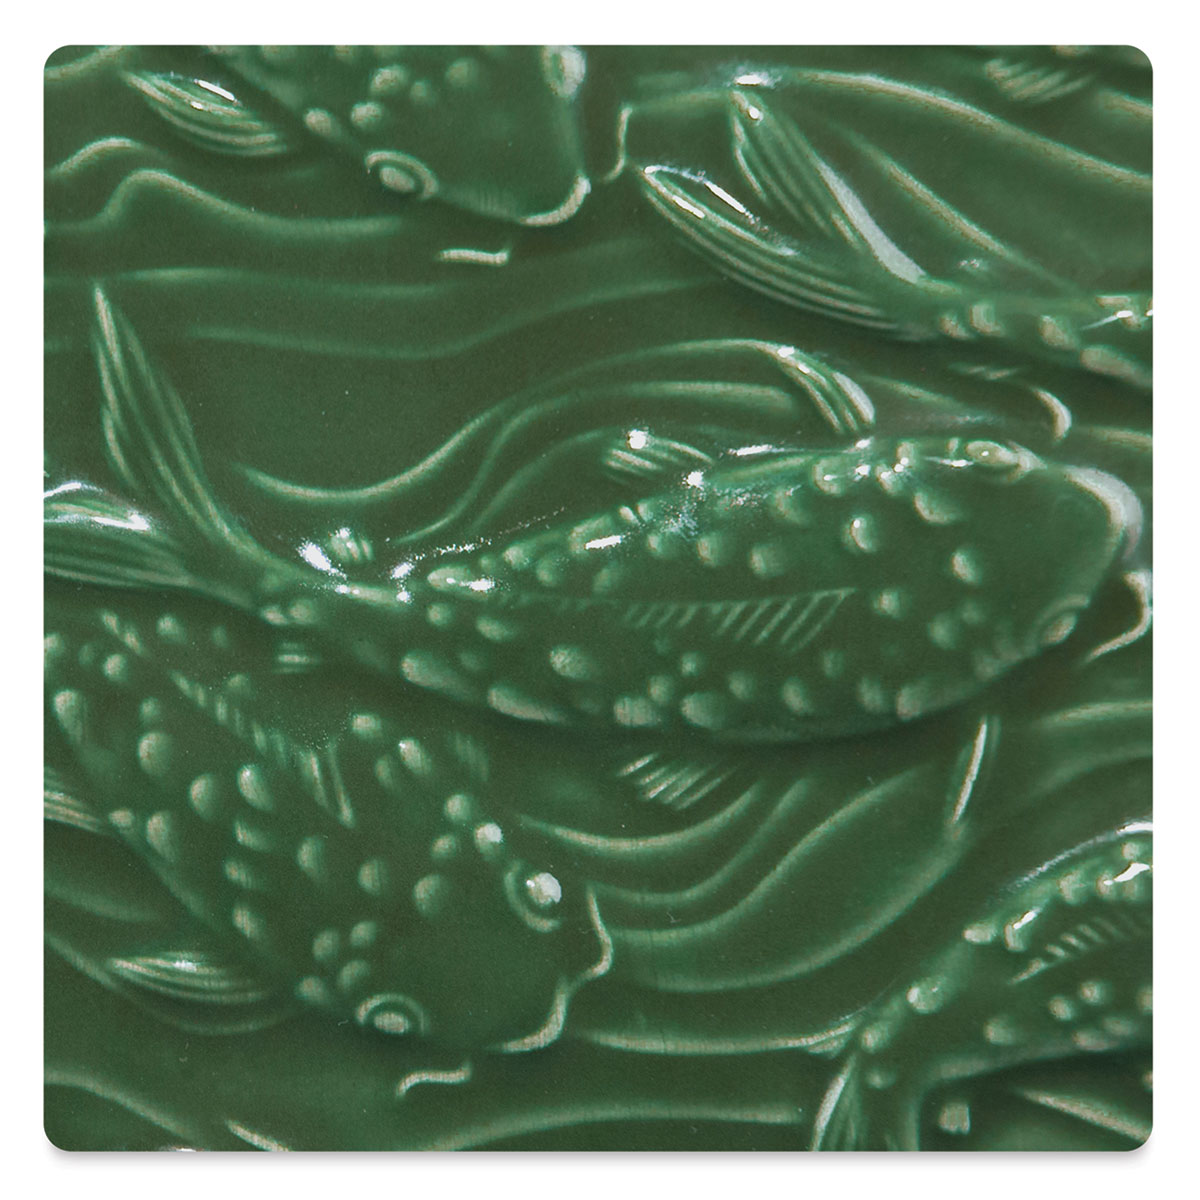 LG-25 Turquoise Green : (LG) Low Fire Gloss